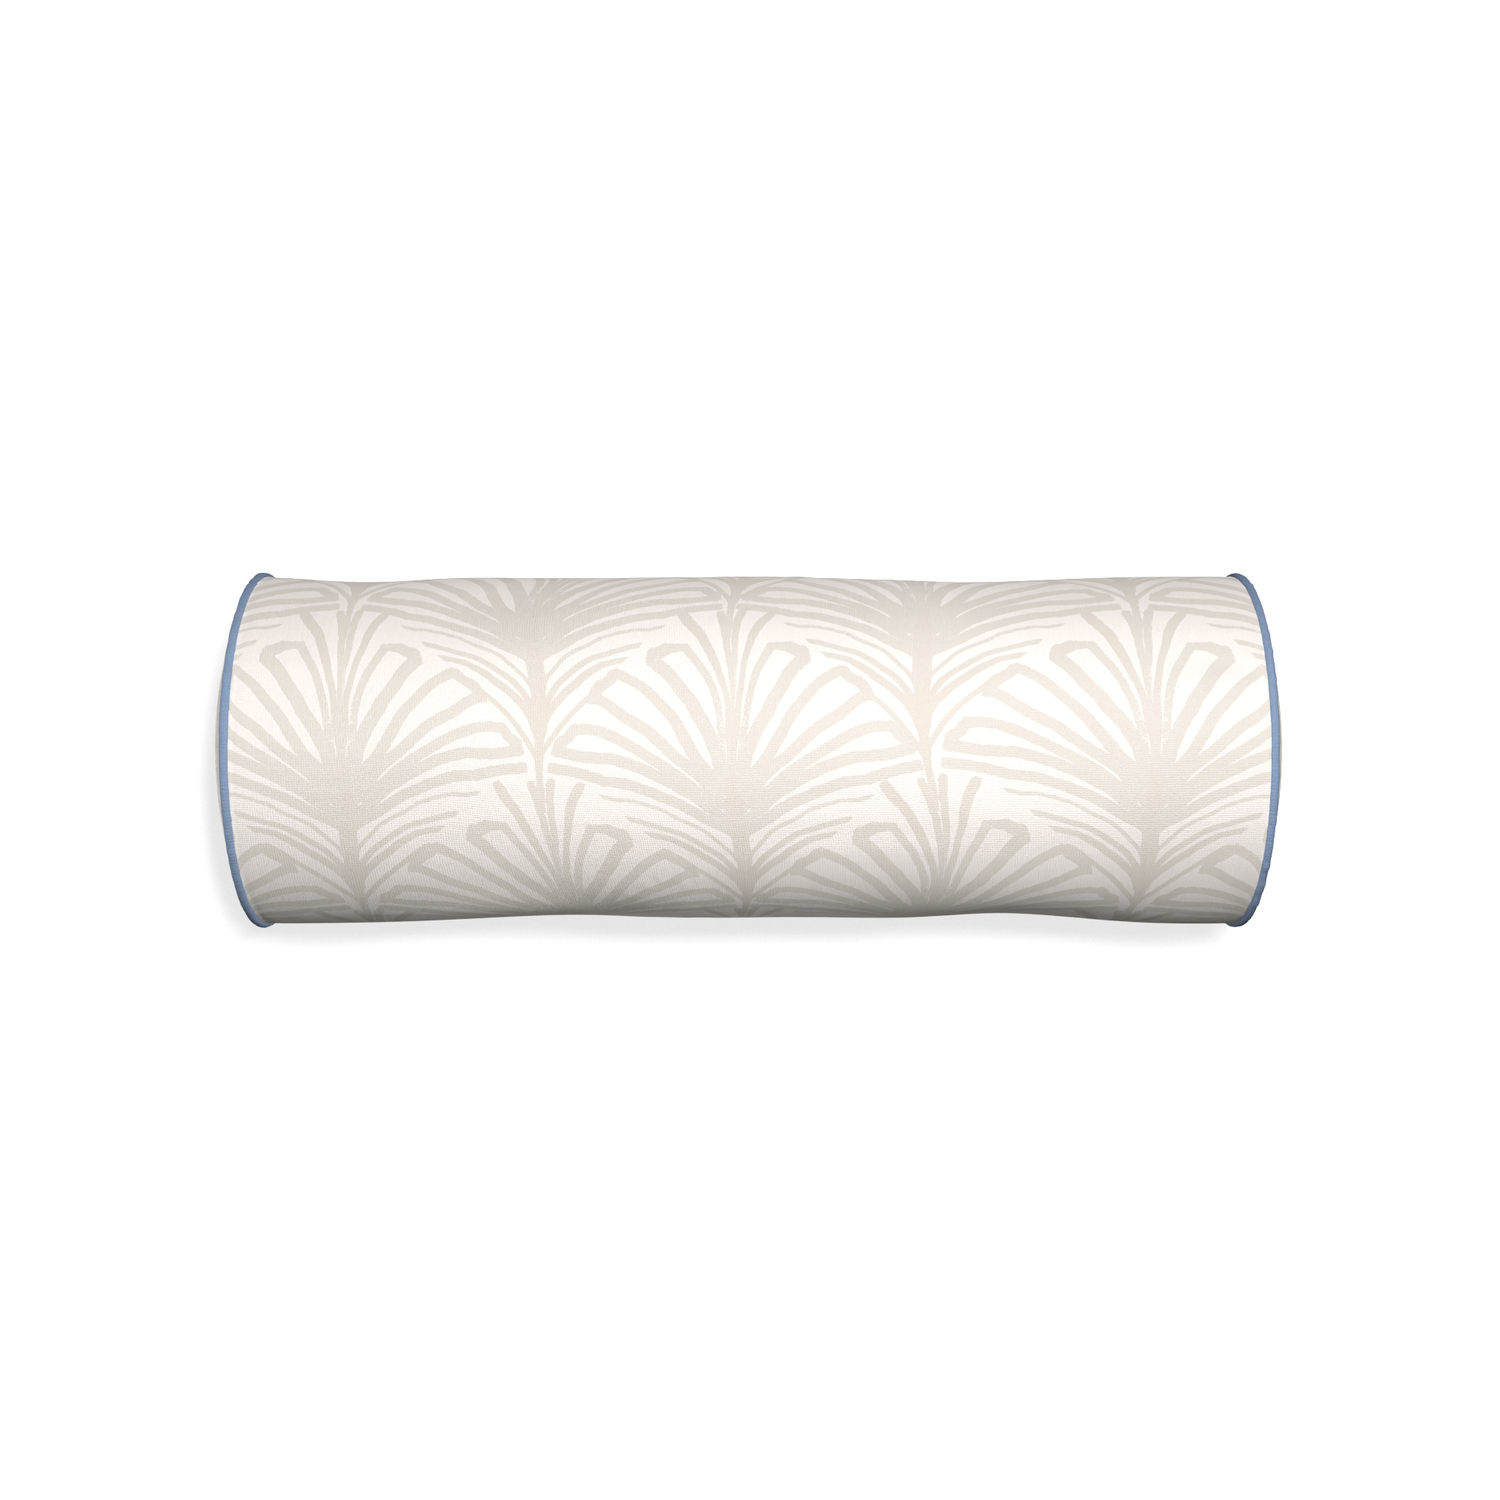 Bolster suzy sand custom beige palmpillow with sky piping on white background